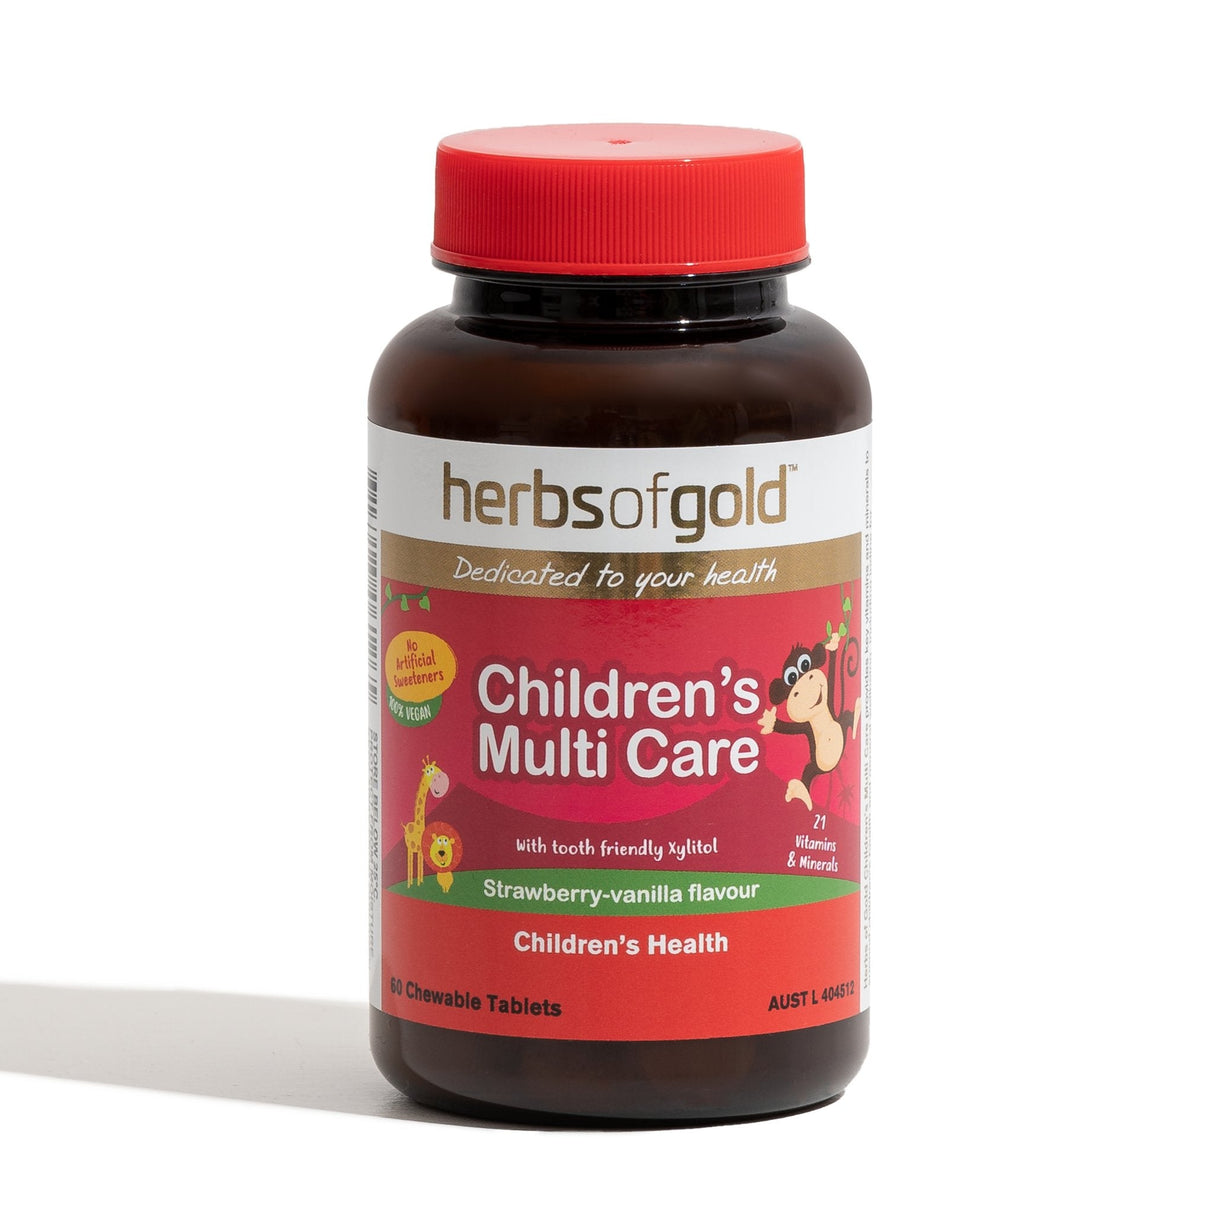 Herbs of Gold Children's Multi Care - Dr Earth - Supplements, Children's Health